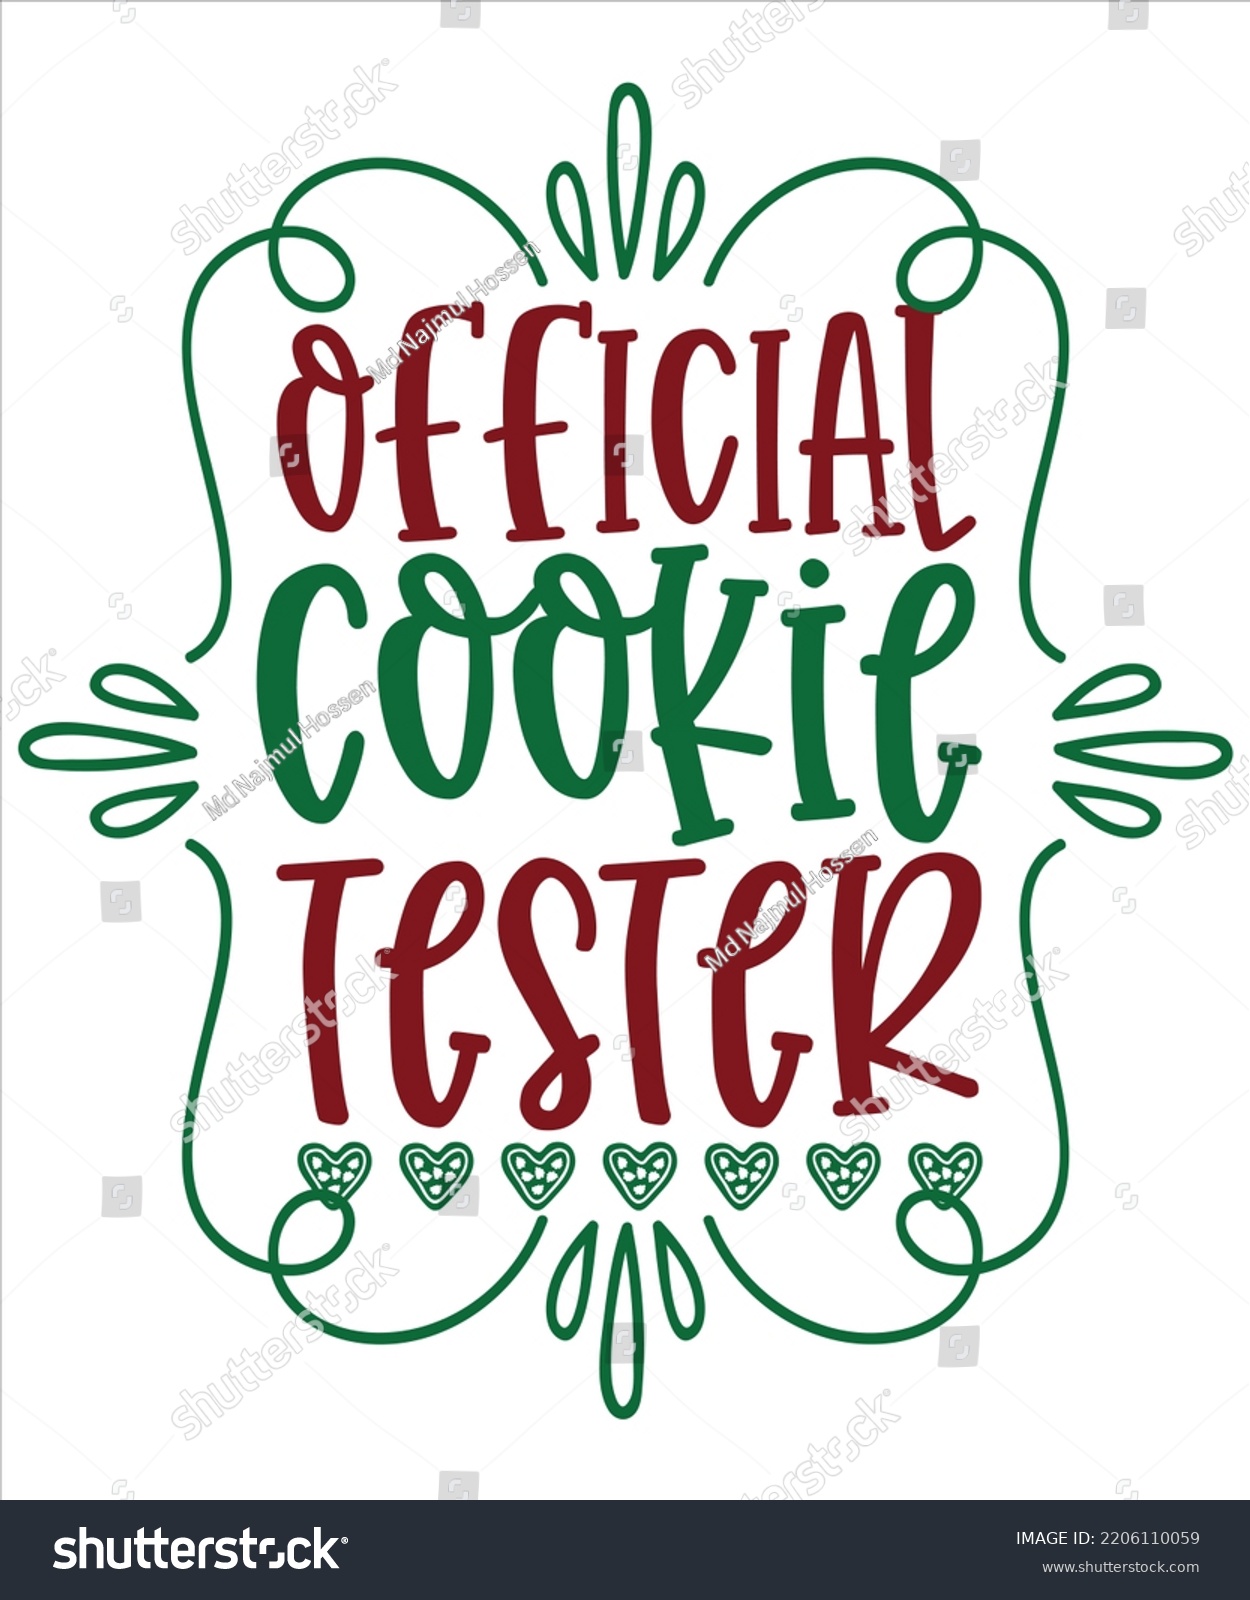 SVG of Official Cookie Tester, Merry Christmas shirts, mugs, signs lettering with antler vector illustration for Christmas hand lettered, svg, Christmas svg, Christmas Clipart Silhouette cutting svg